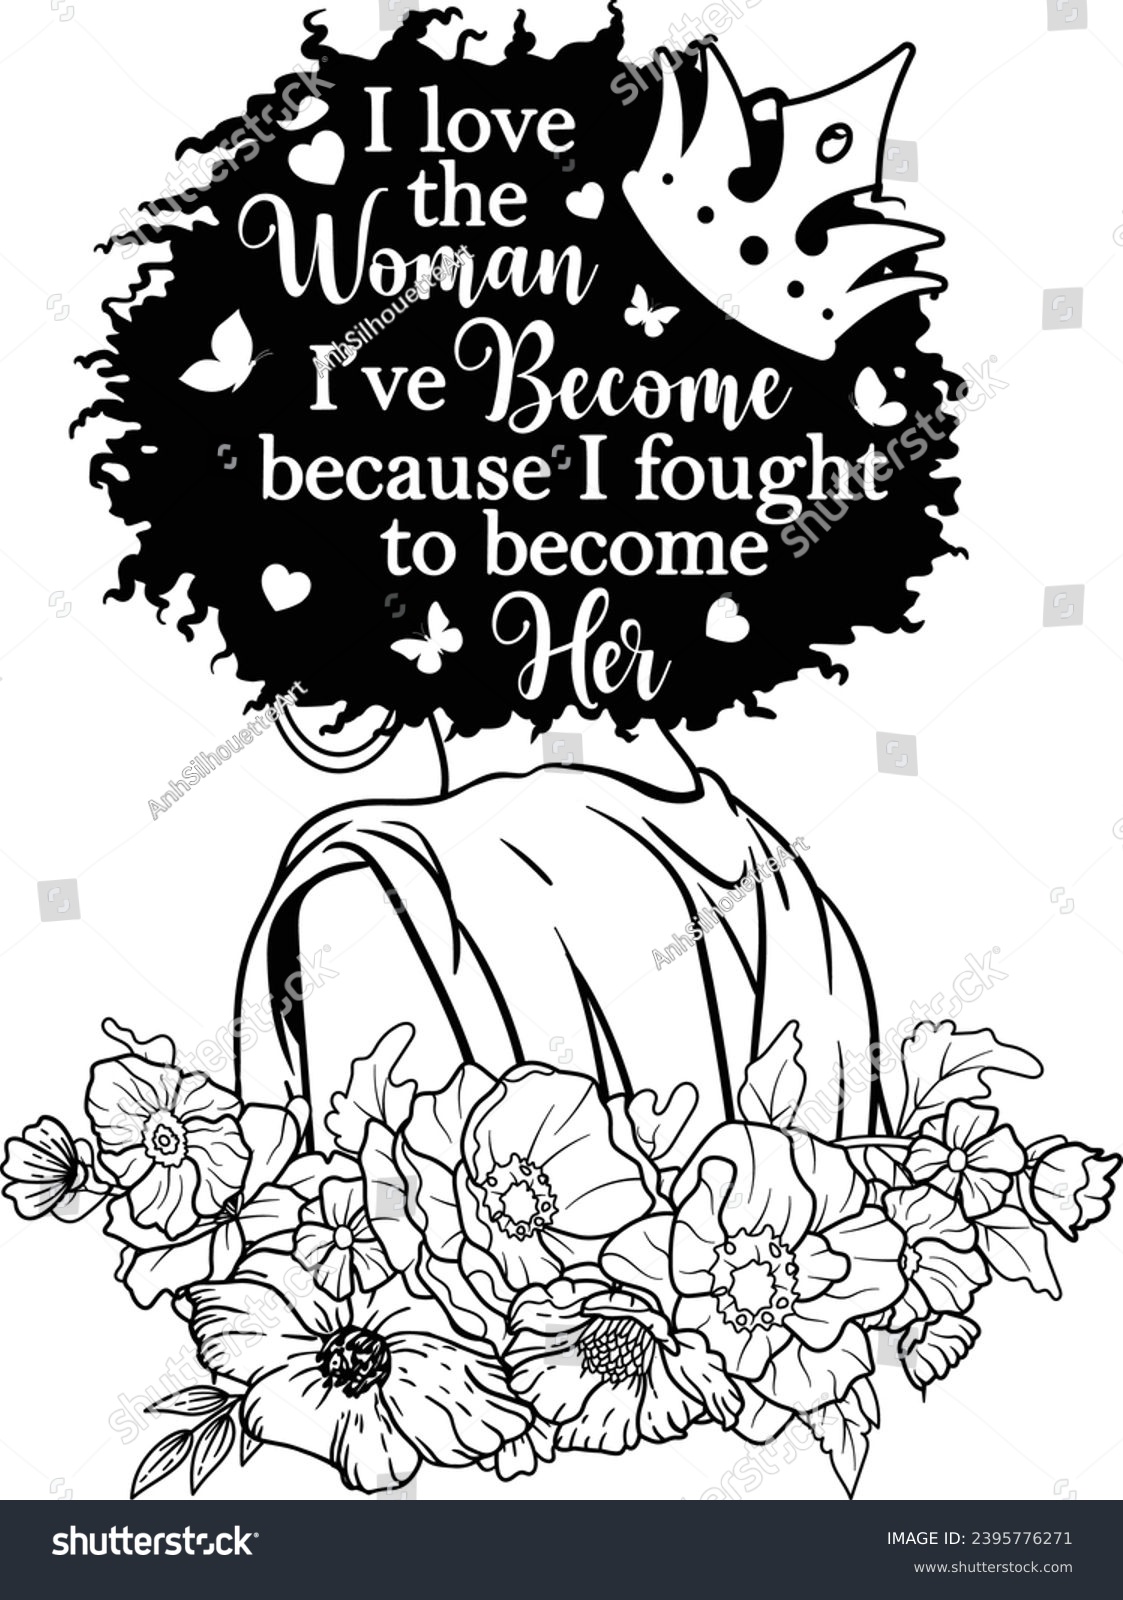 SVG of I Love The Woman I've Become Because I Fought To Become Her, Boss Lady, Strong Girl, Black Girl Magic Motivation, Afro Woman Silhouette svg